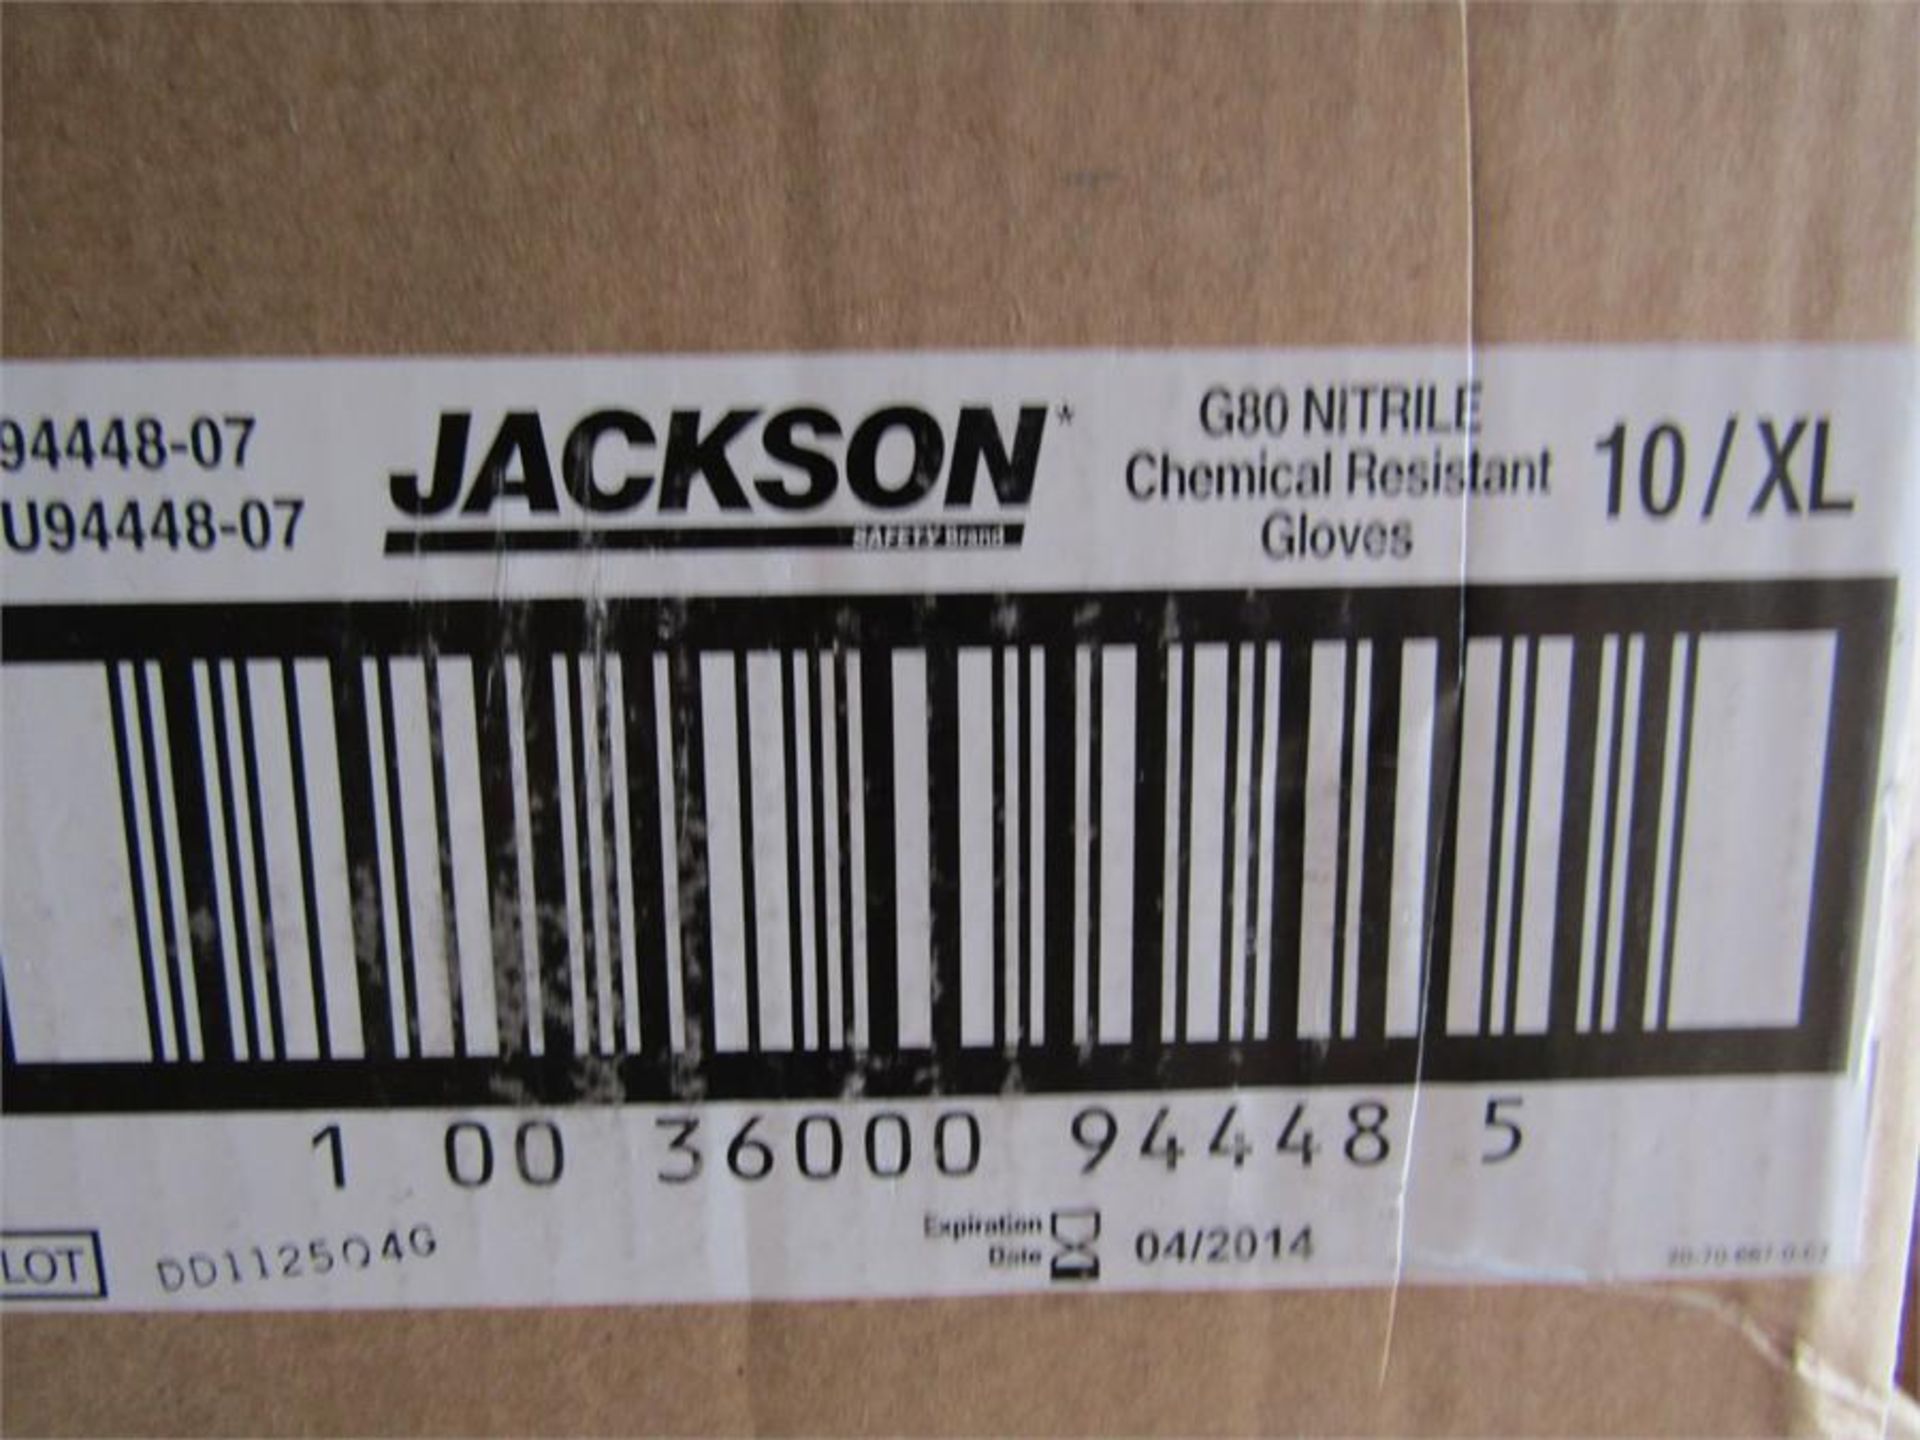 60 Pairs of JACKSON G80 NITRILE Chem Res Gloves - Image 3 of 3